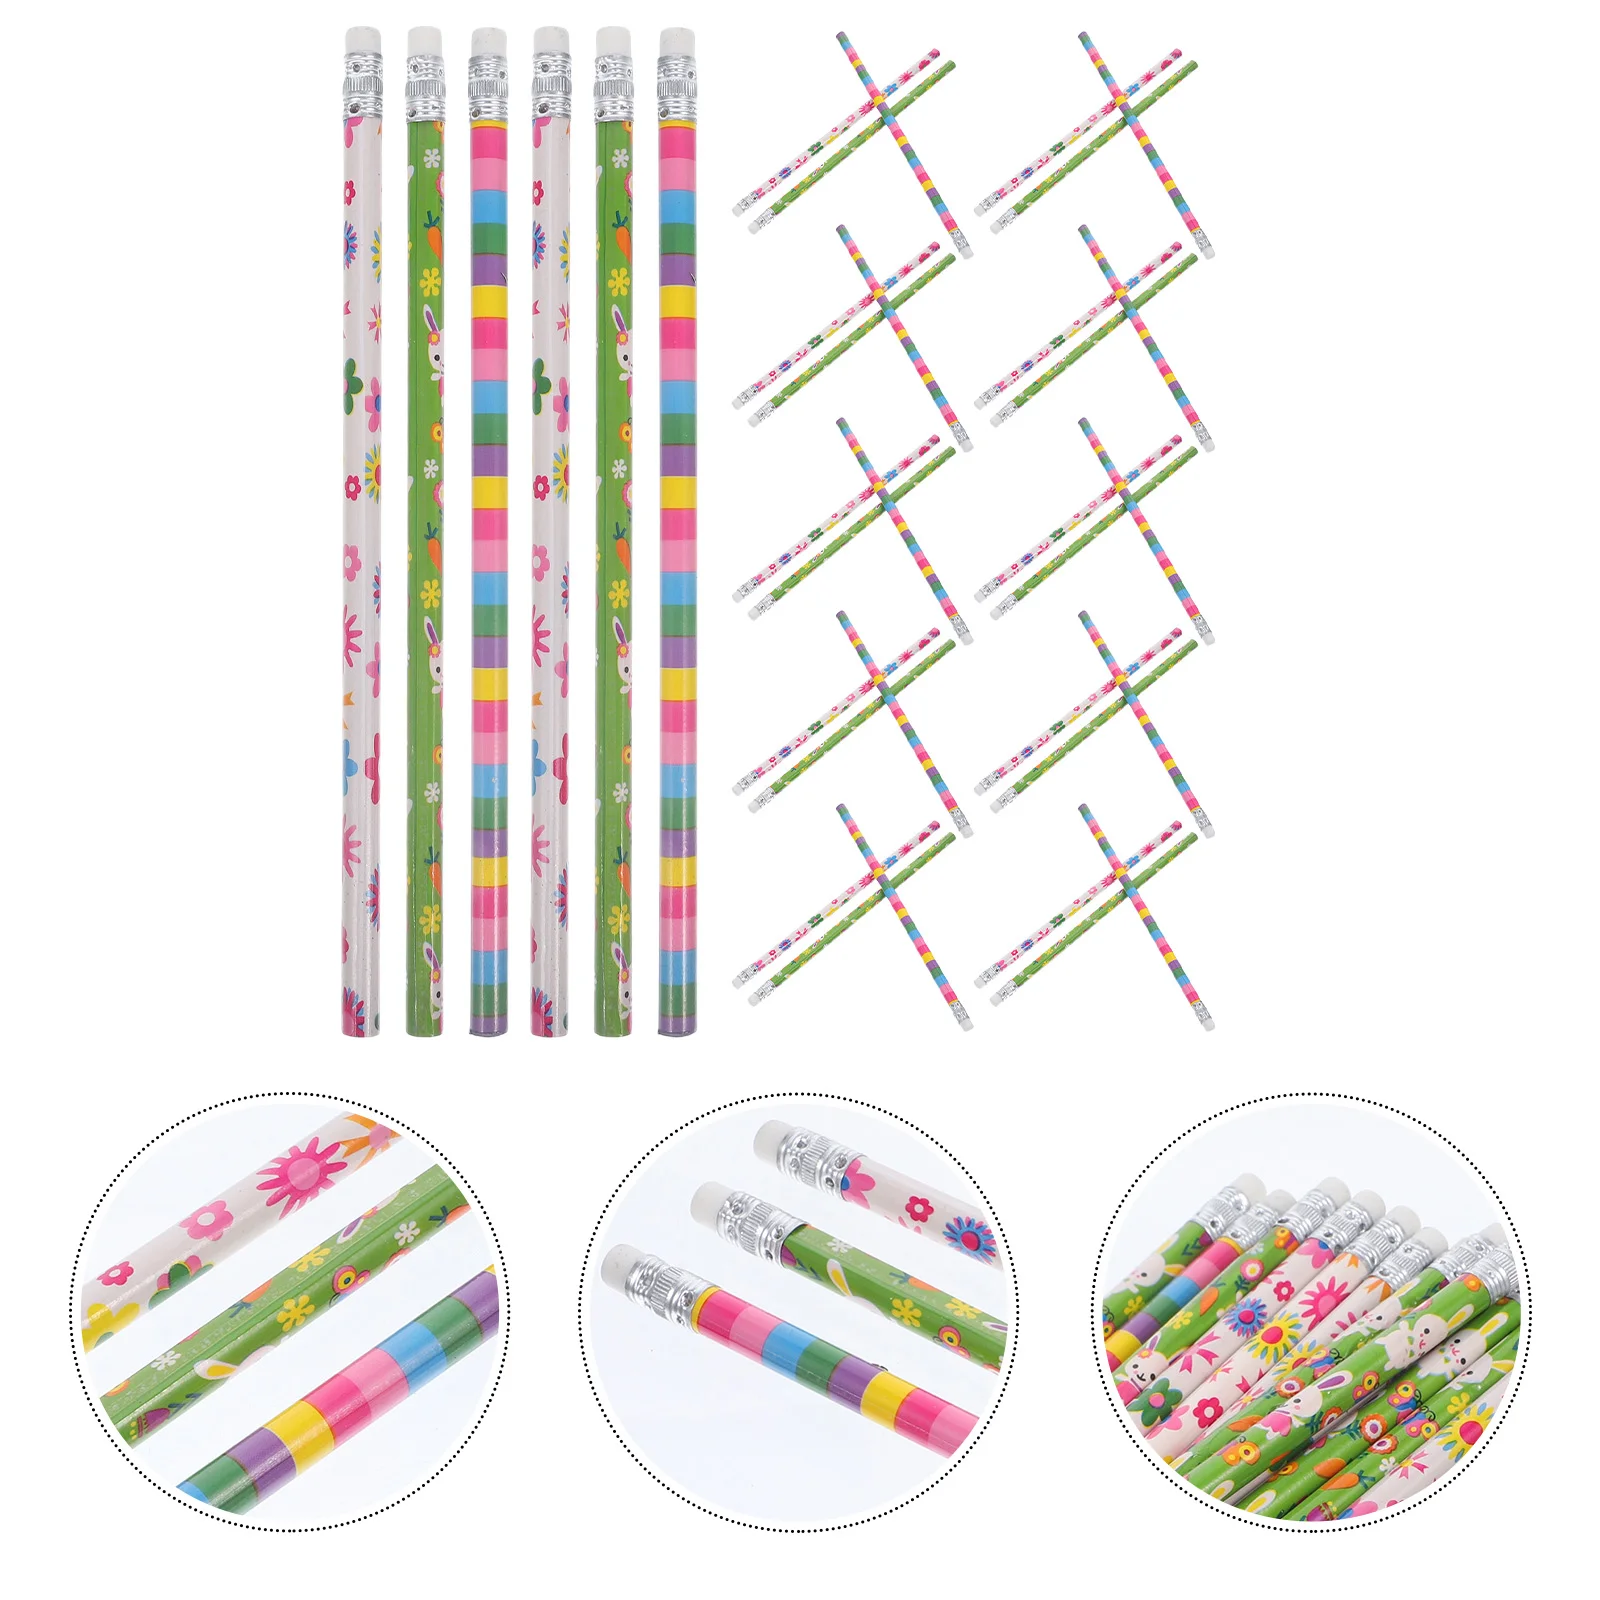 

40 Pcs The Gift Easter Pencil Pencils with Erasers Drawing Students Writing Kids Sketch Party Favor Painting Primary School